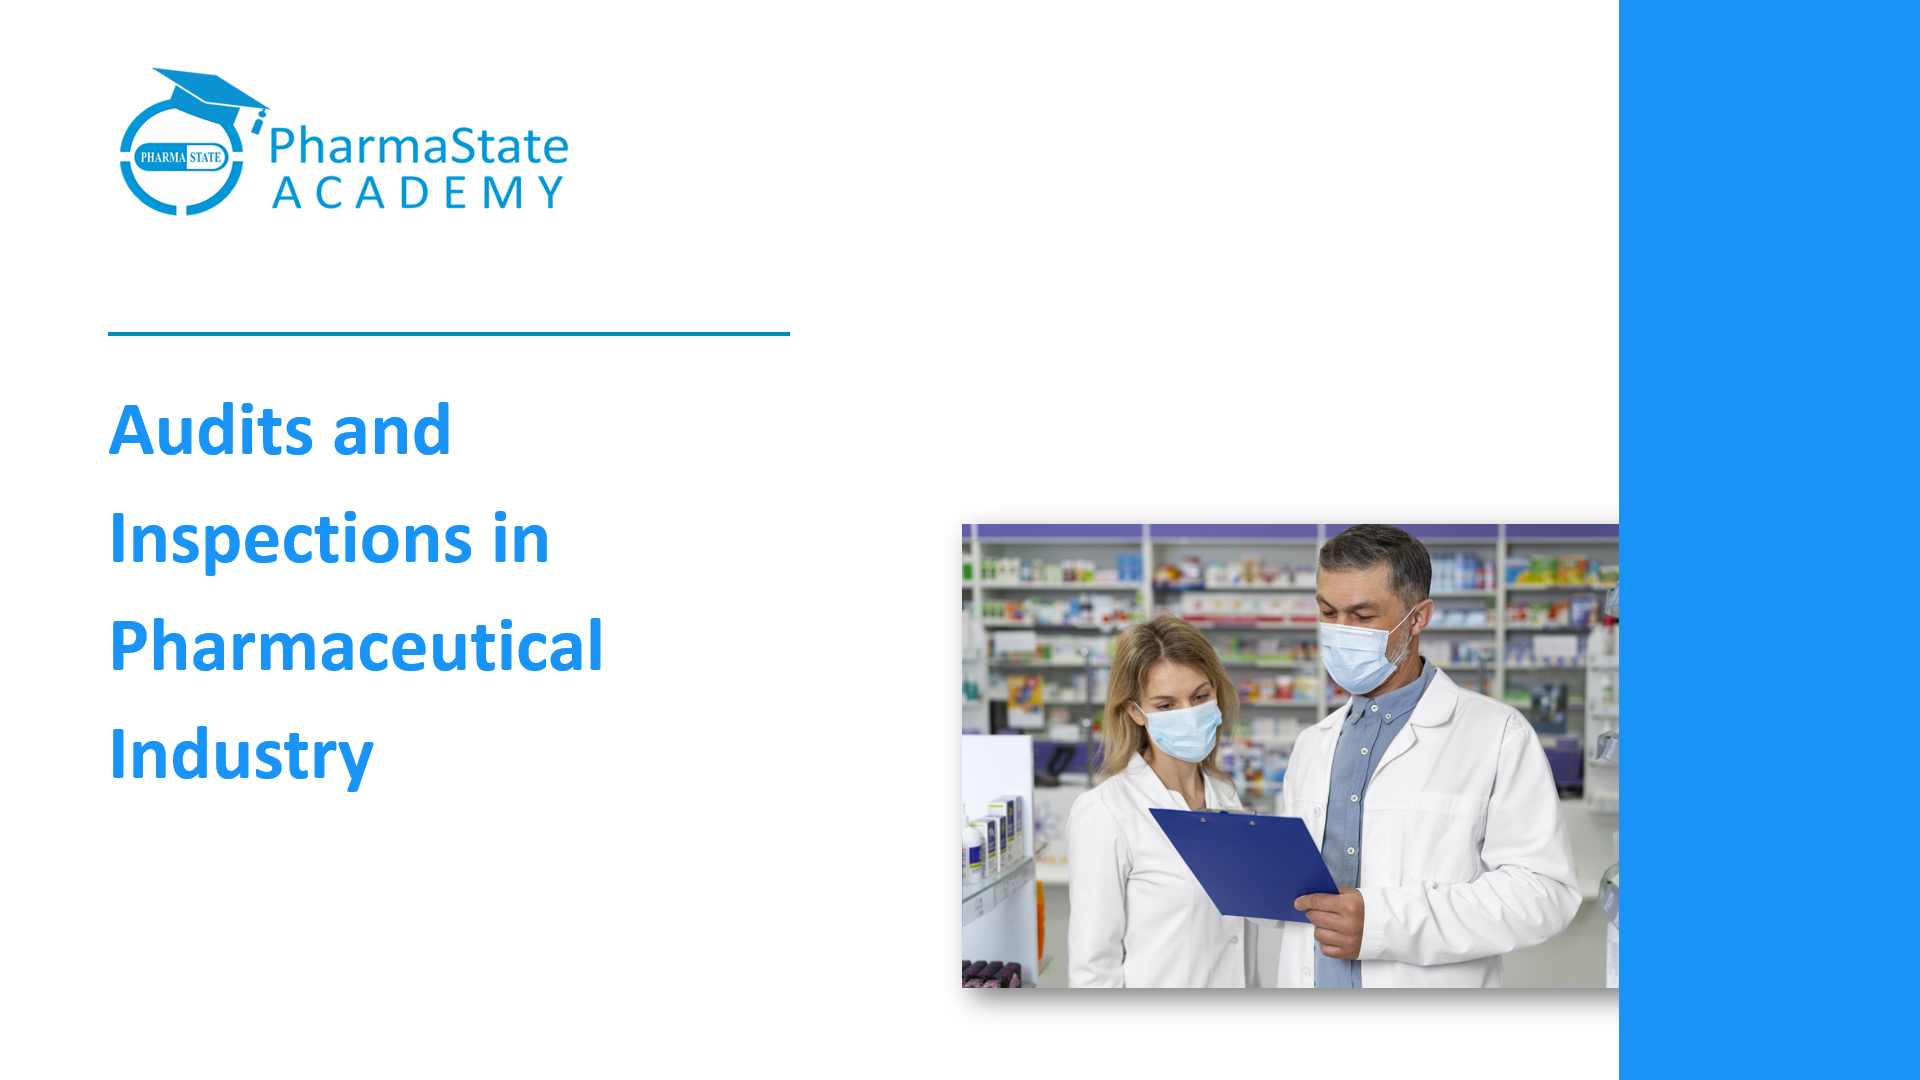 Audits and Inspections in Pharmaceutical Industry